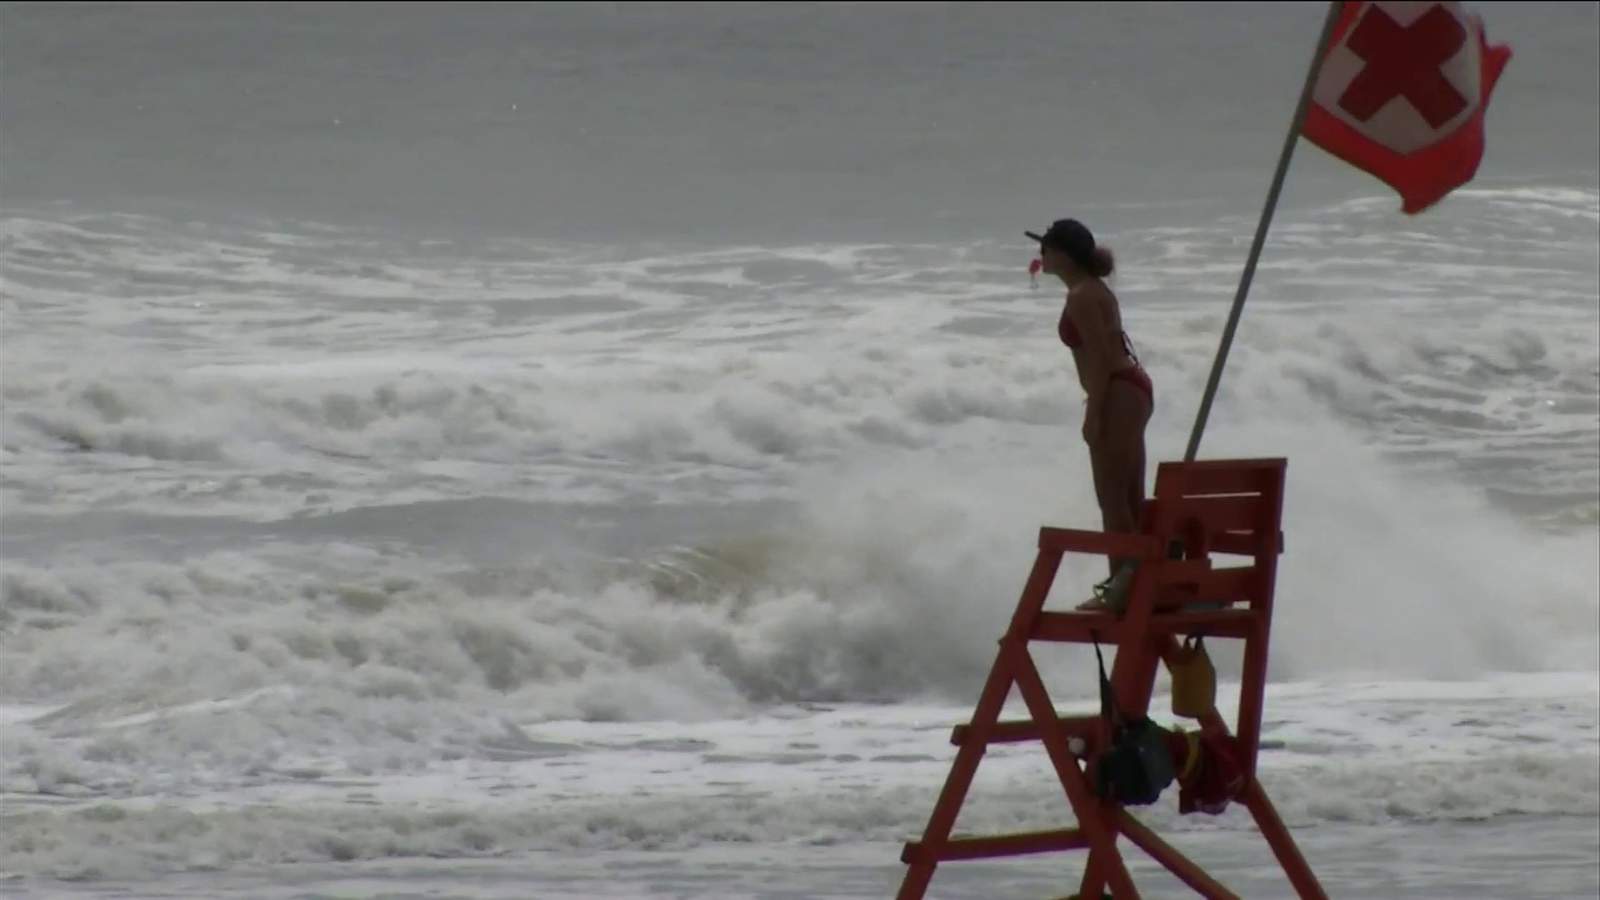 Beachgoers warned of dangerous conditions as Isaias passes Jacksonville